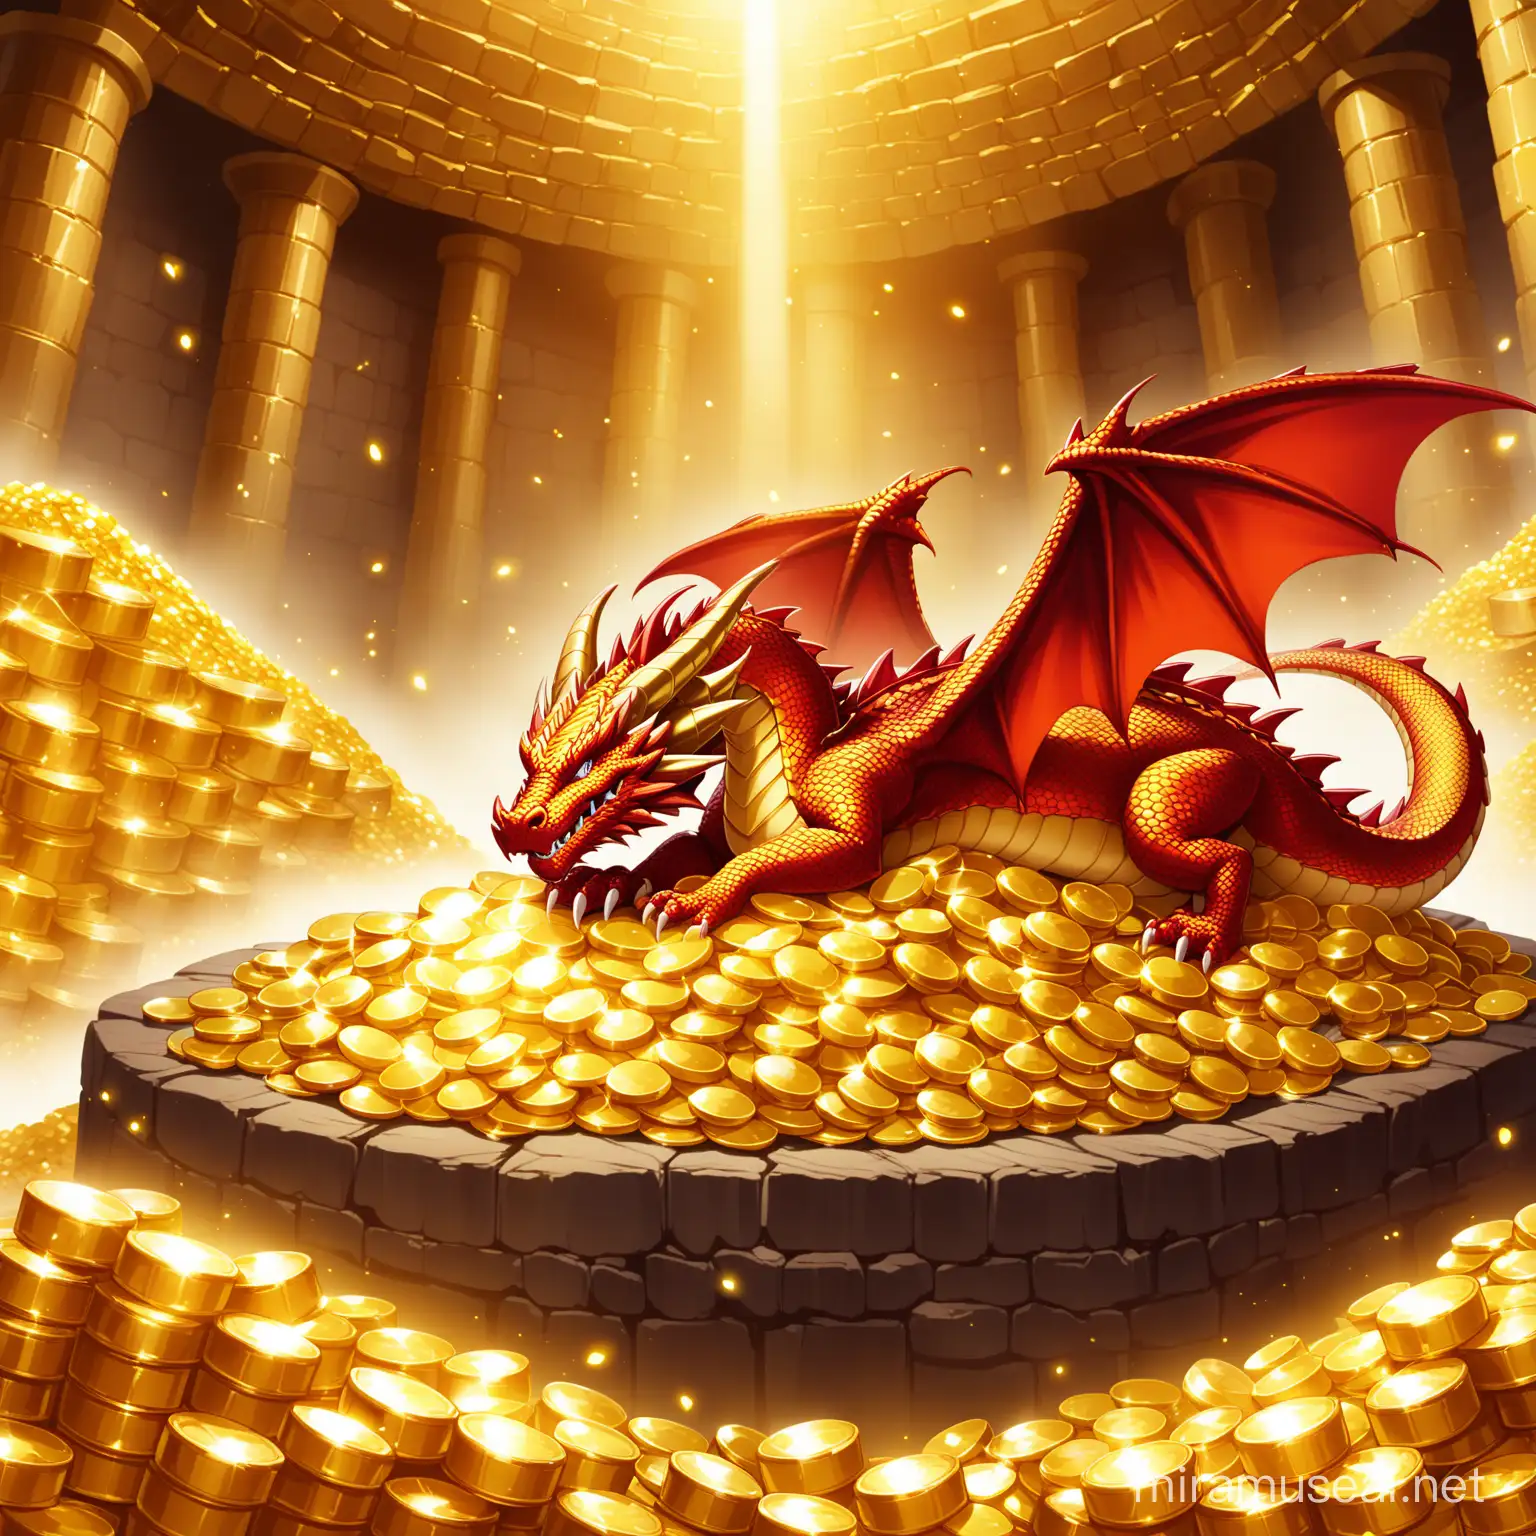 Red Dragon Sleeping on Pile of Gold in Treasure Room